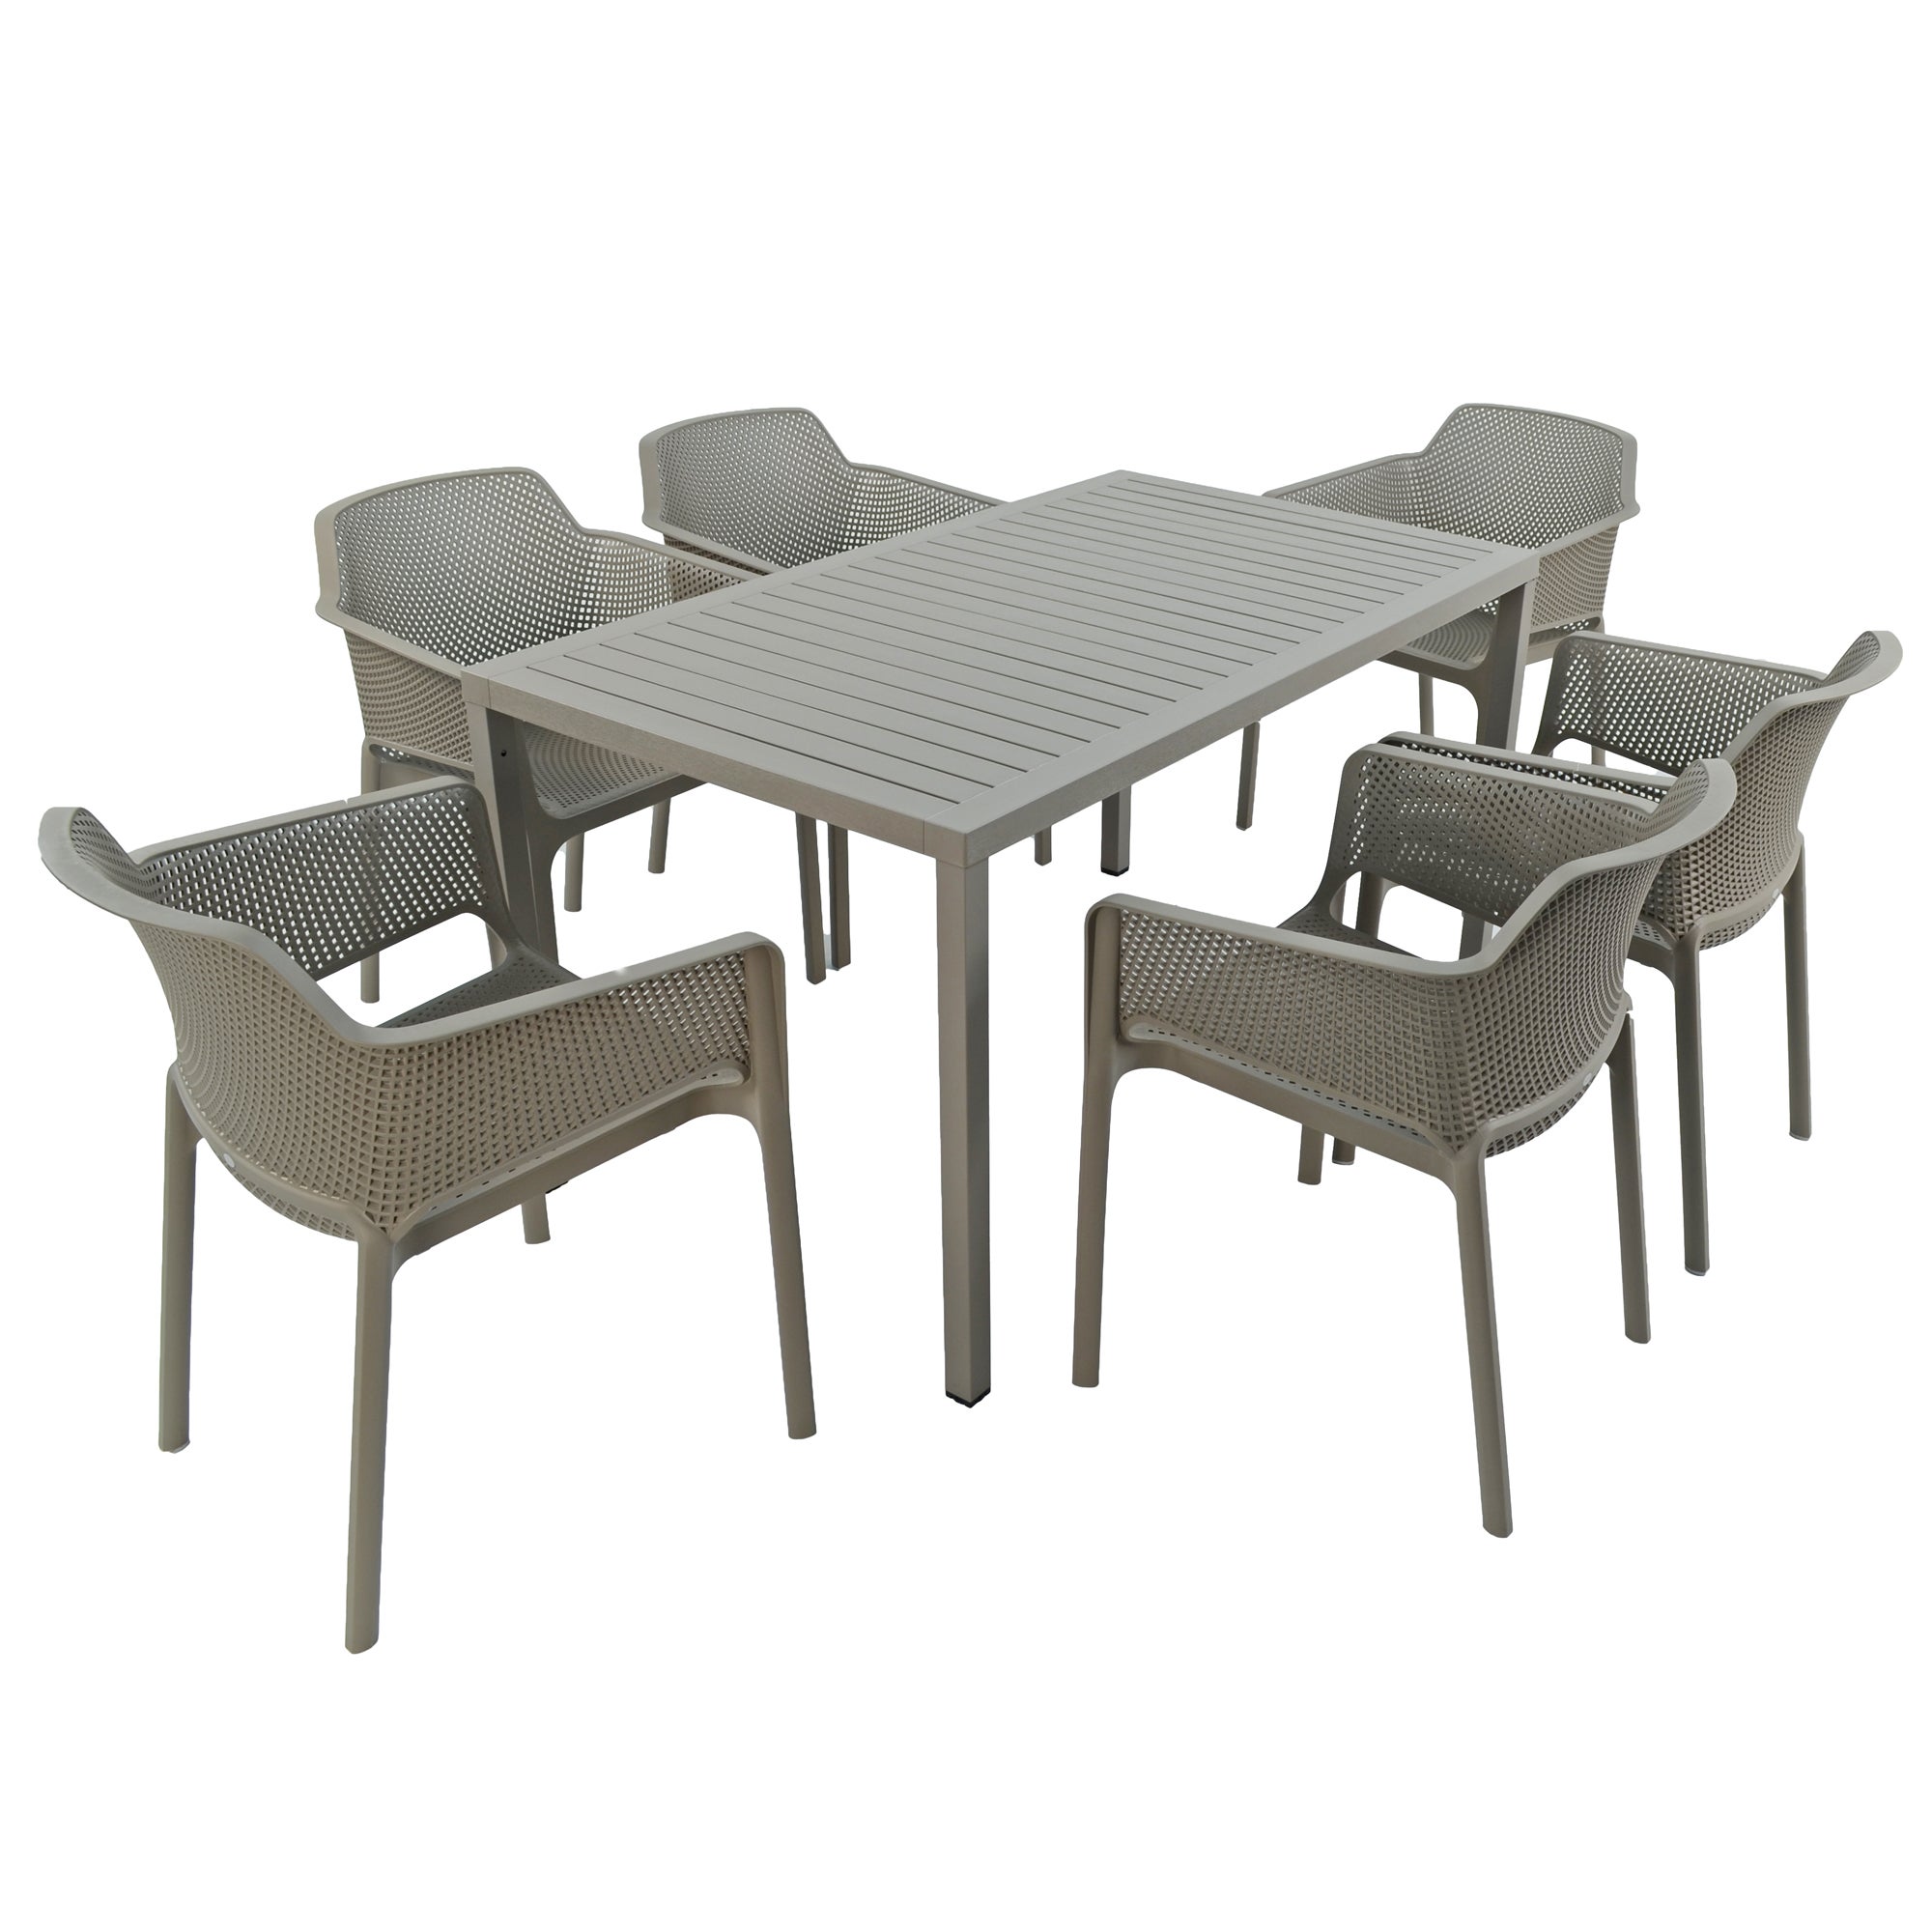 Cube Dining Table with 6 Net Chair Set Turtle Dove Grey